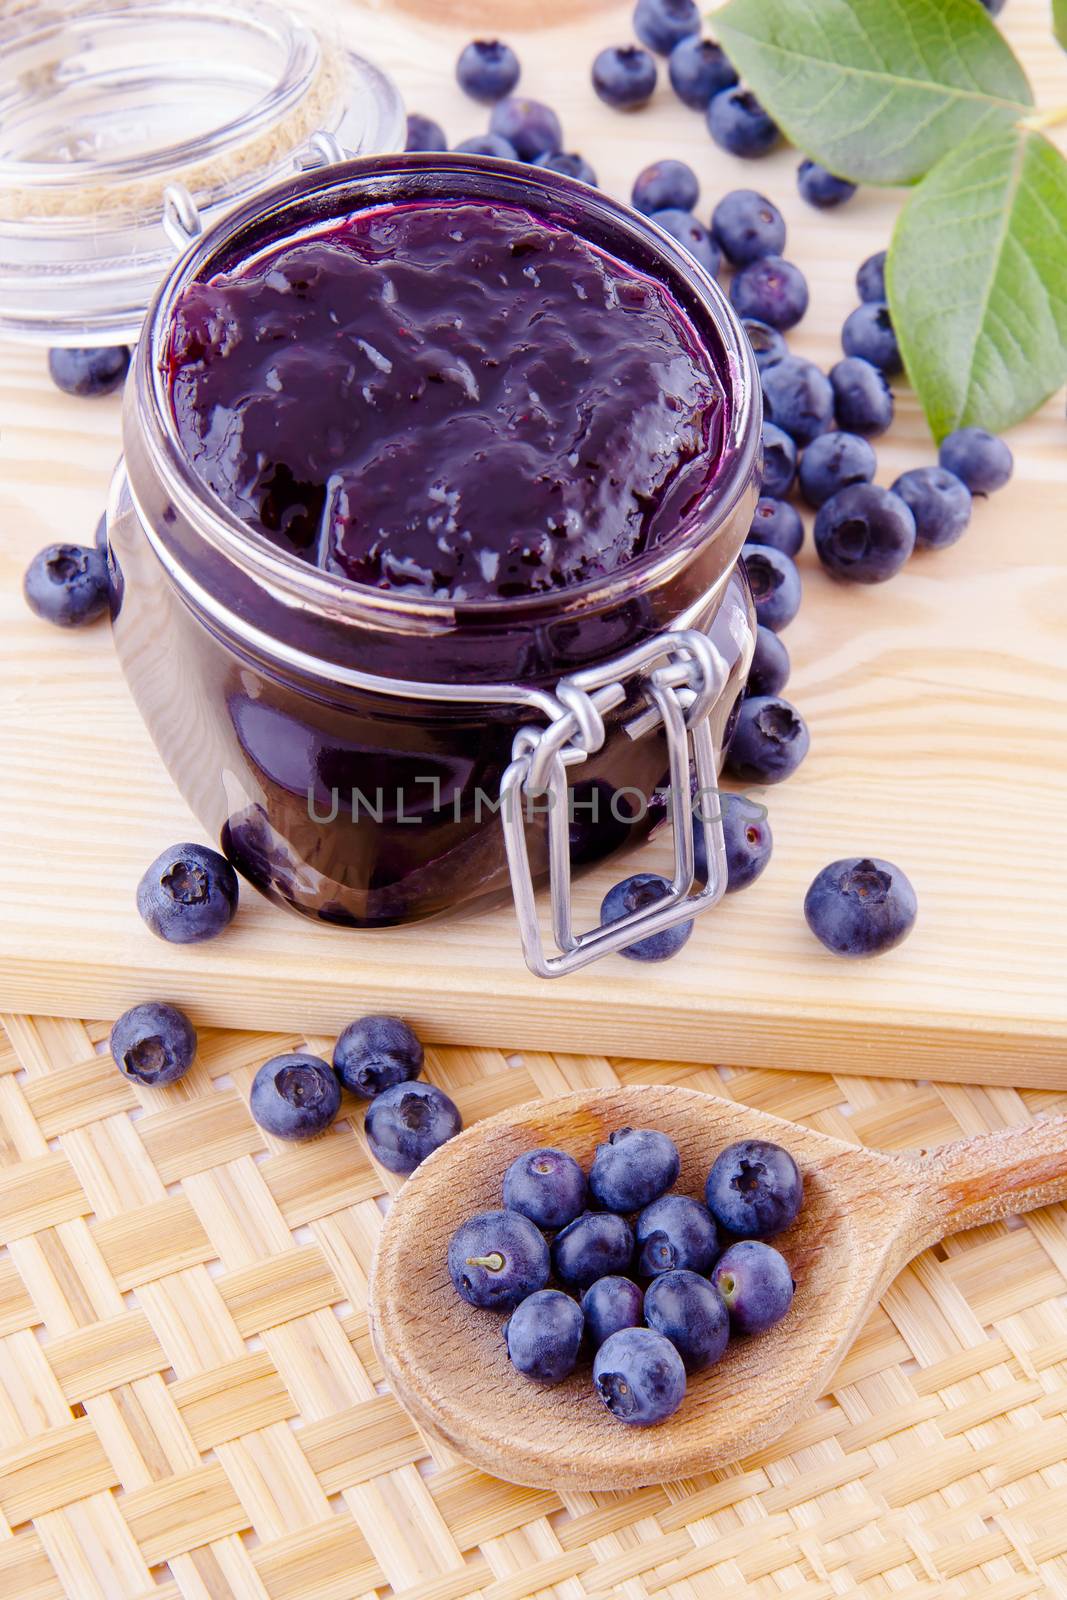 Blueberry fruits jam in the kitchen on the table